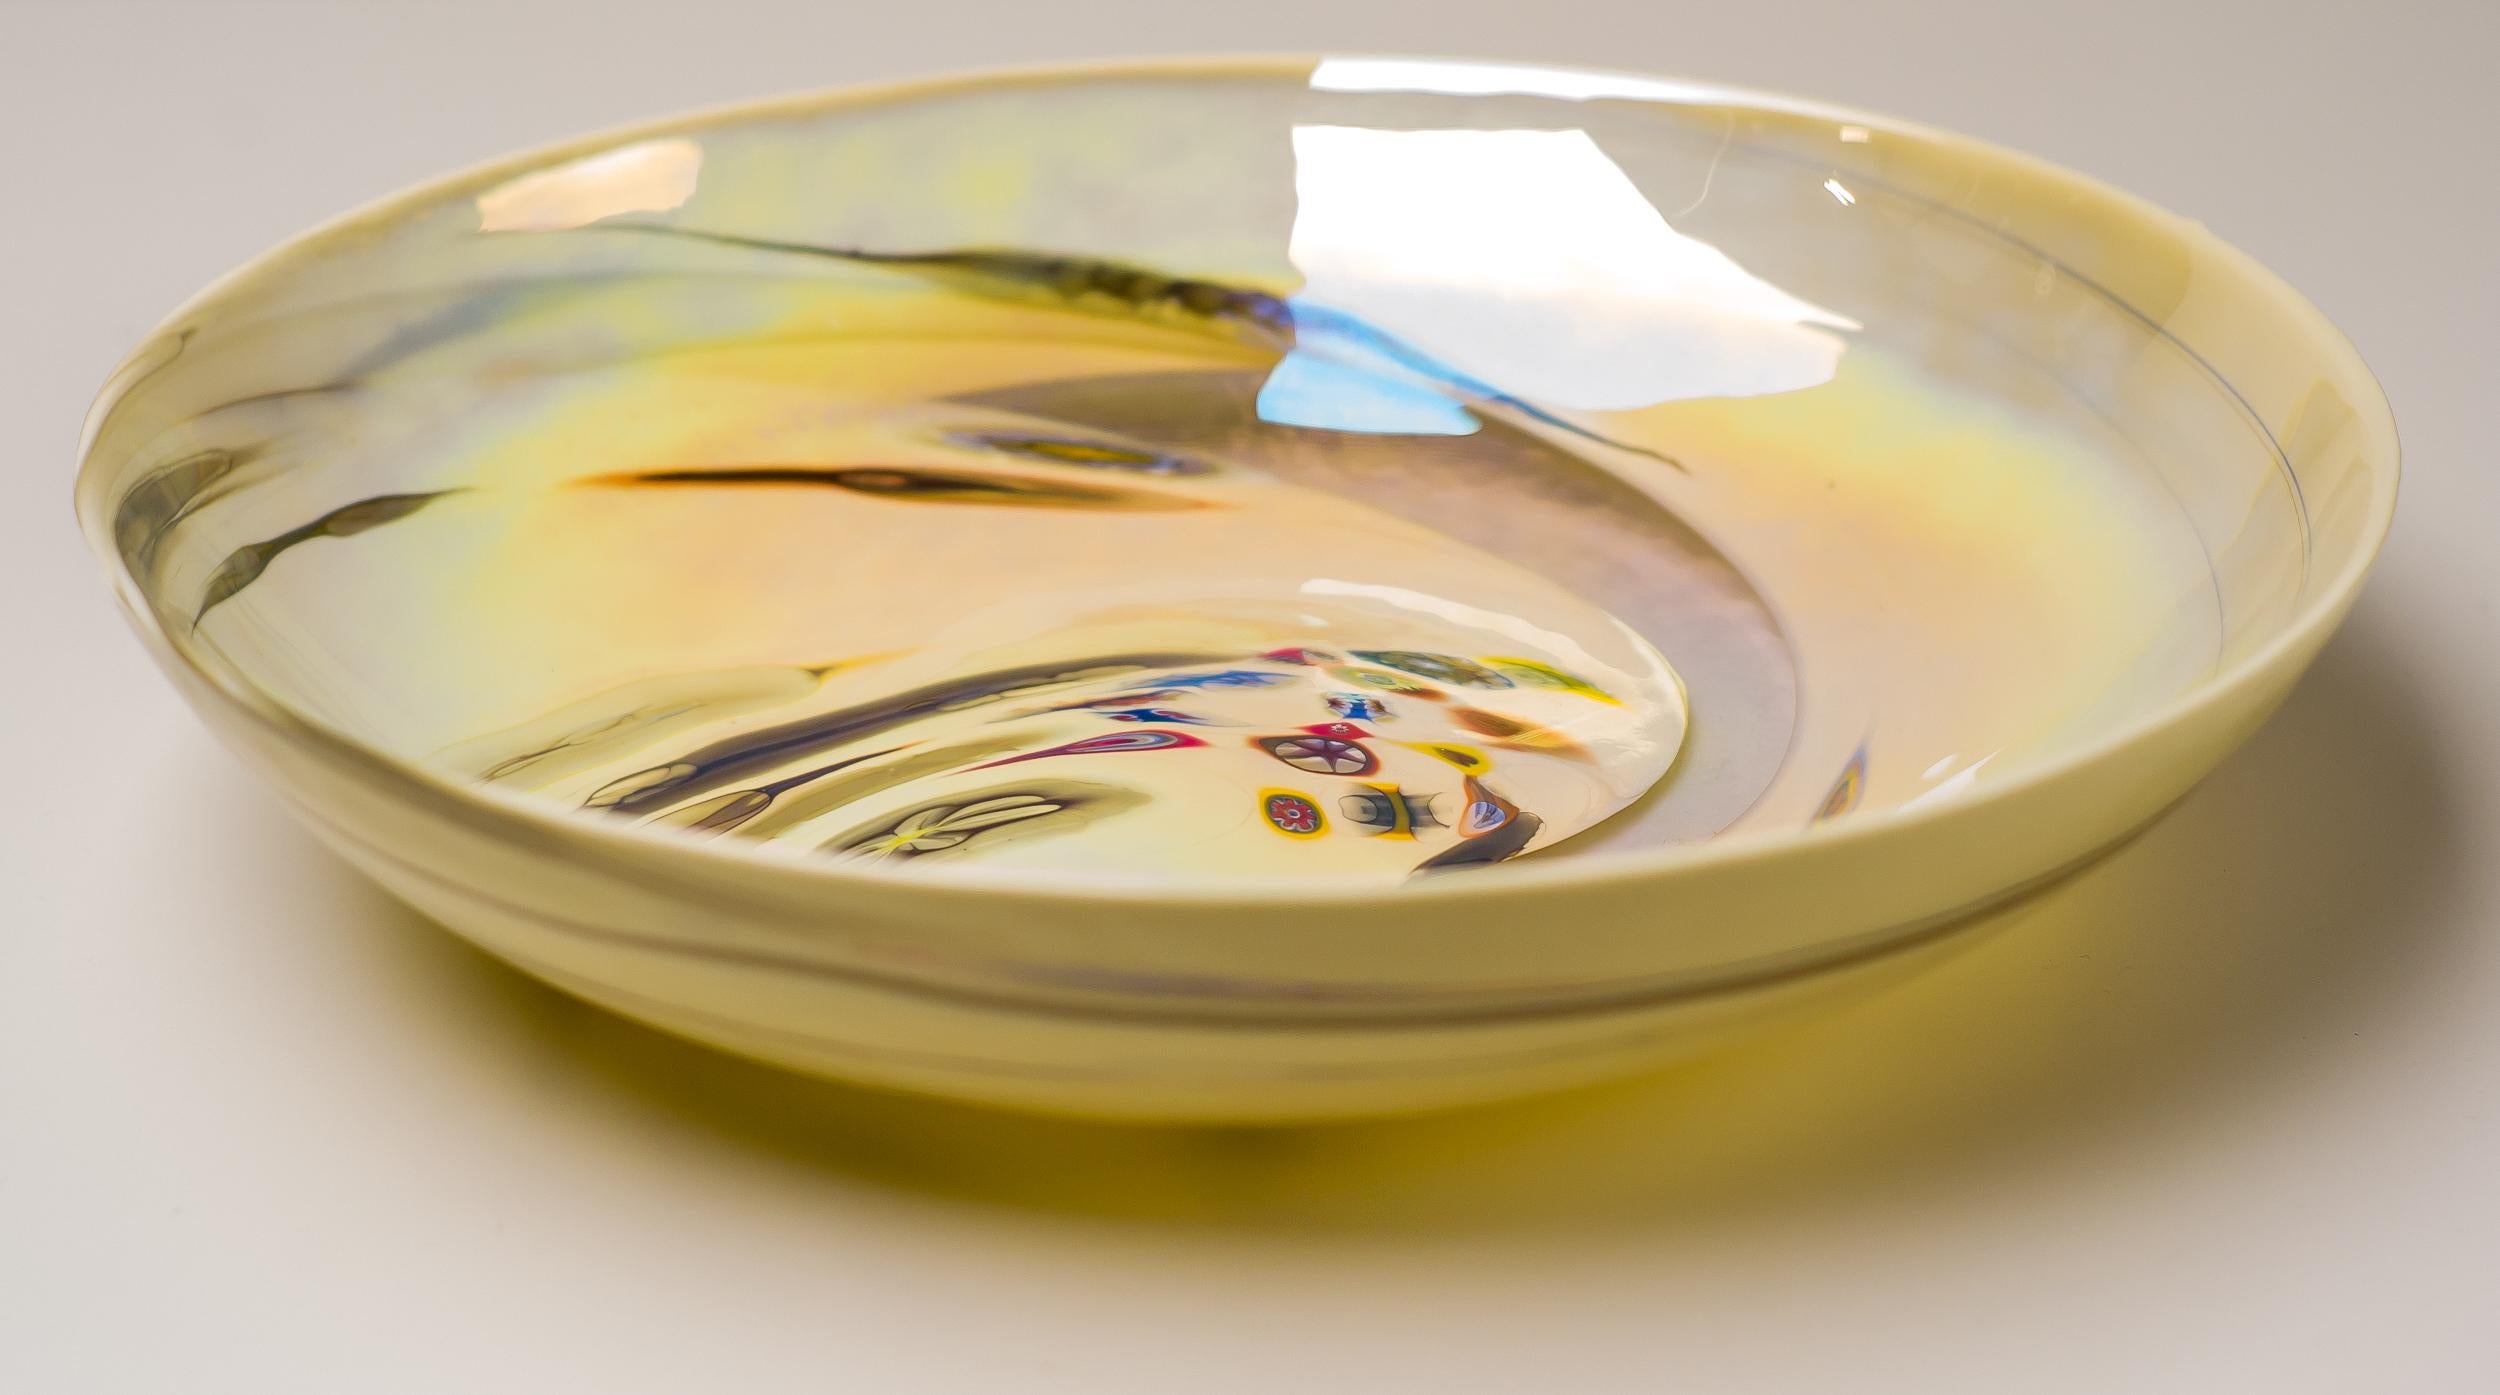 Impressive large bowl made of spiraling clear and colored glass and colorful murrines.
Engraved; Dino Martens, A. Toso, Murano.

Born in Venice in 1894, Dino Martens studied painting and design at the Accademia di Belle Art in Rome. A talented